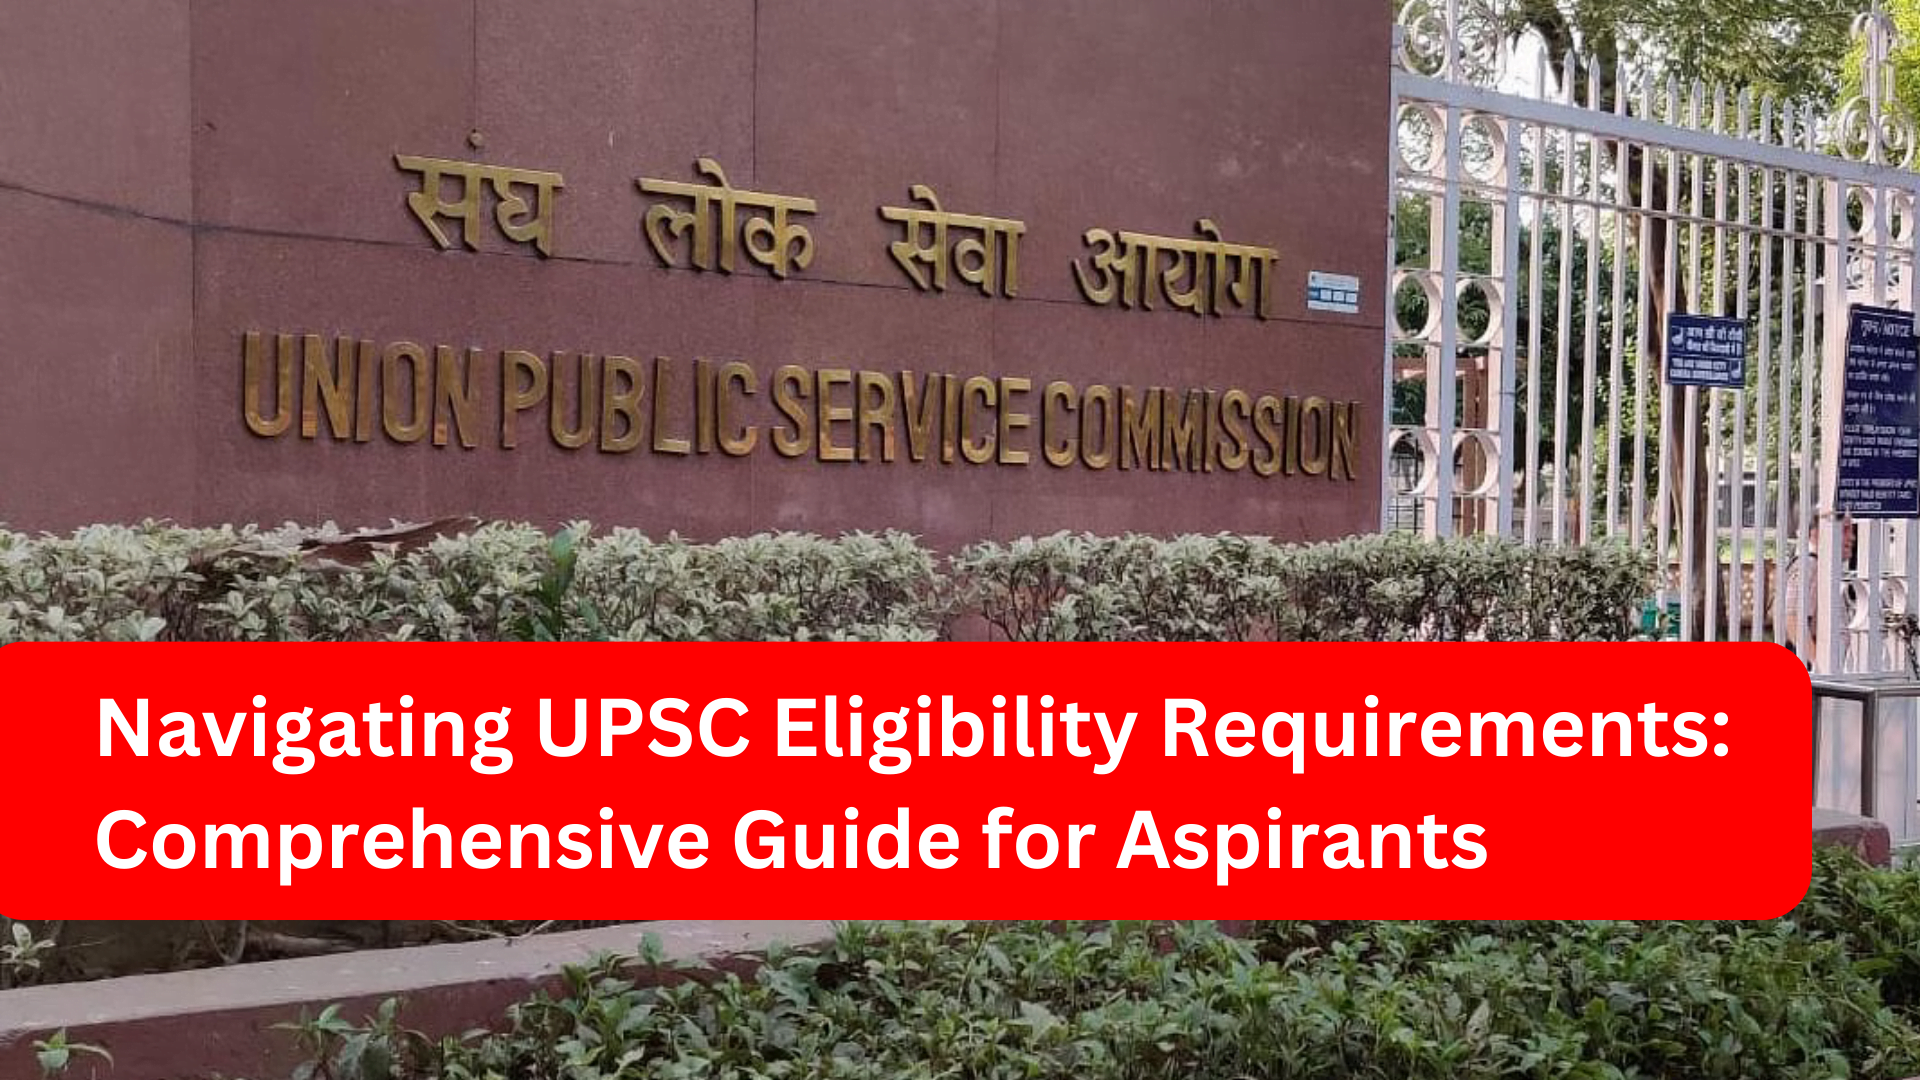 Navigating UPSC Eligibility Requirements: A Comprehensive Guide for Aspirants